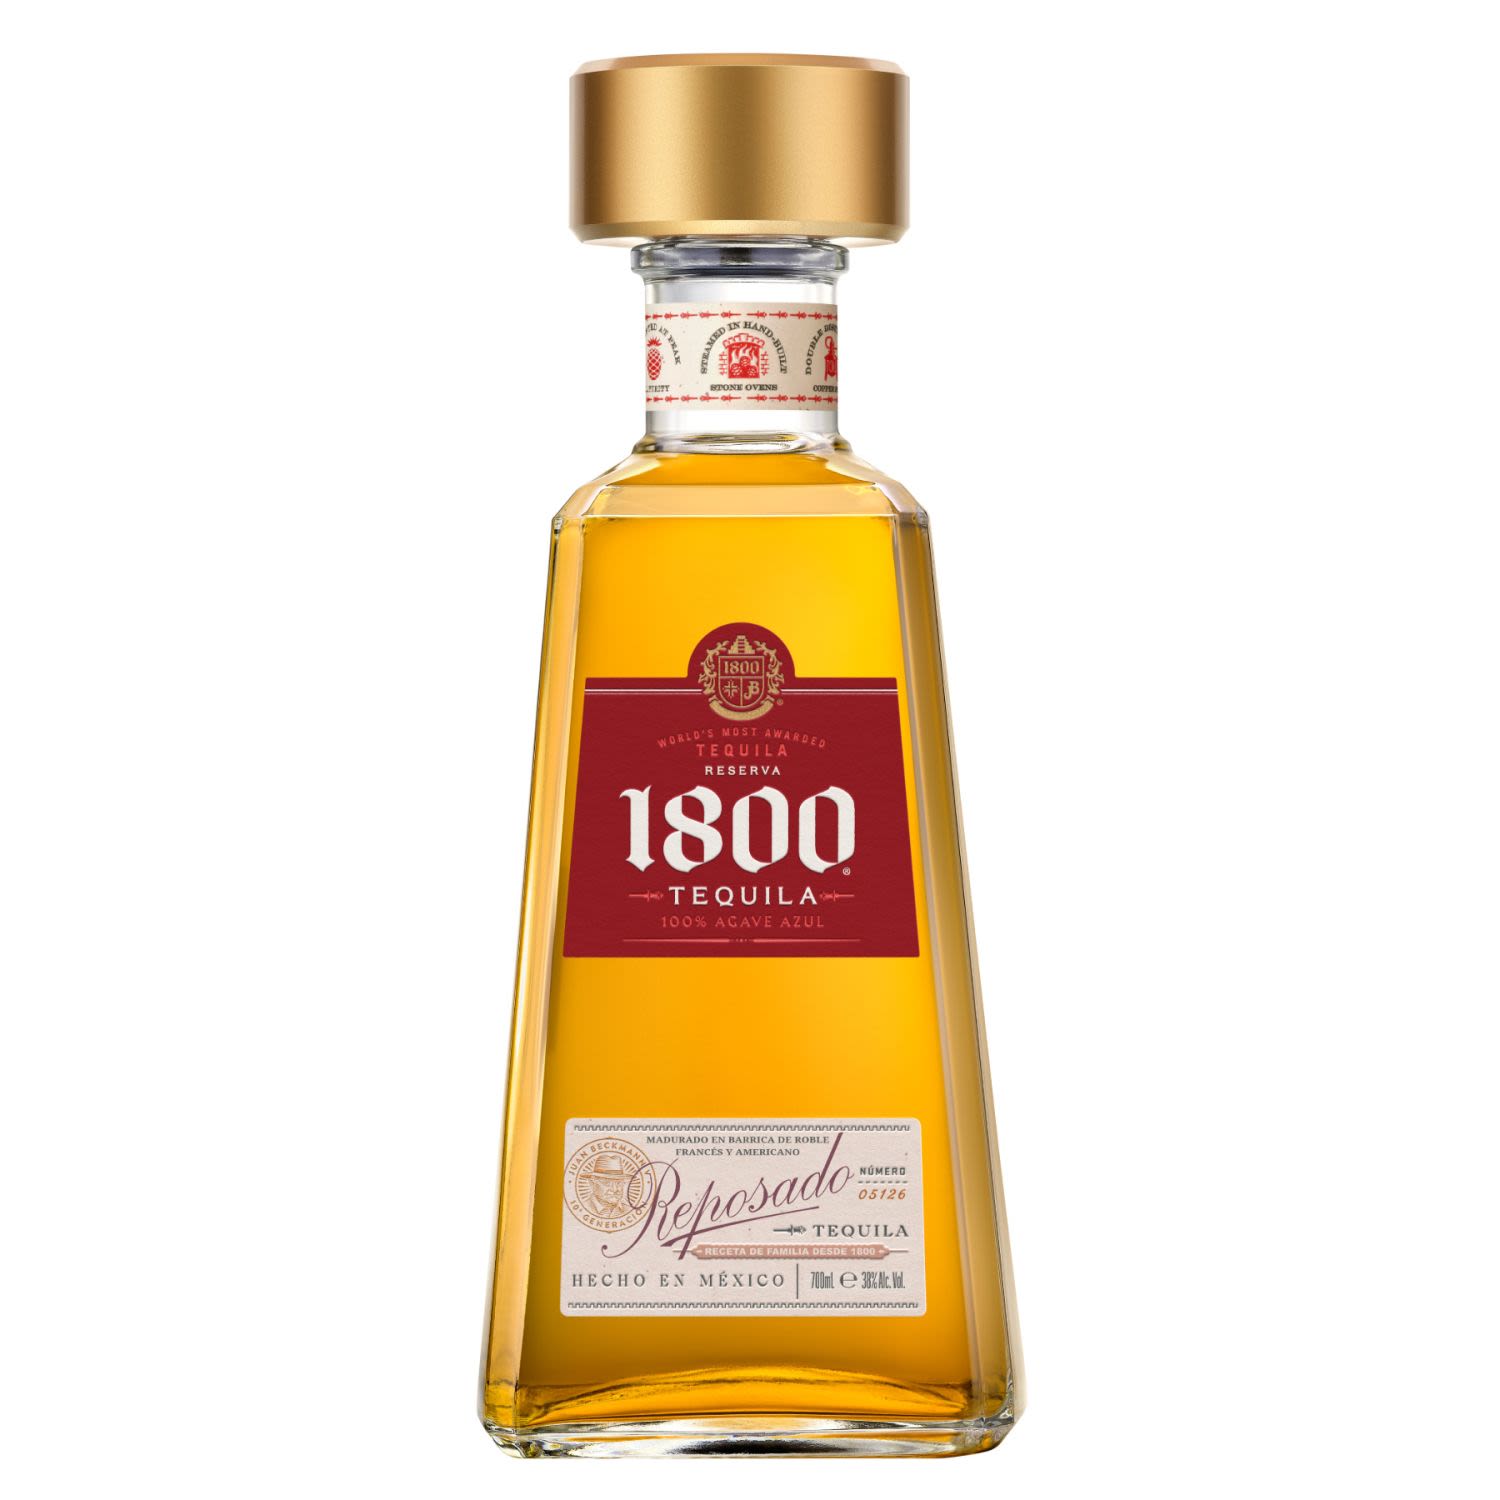 1800 Reposado Tequila has colour of bright honey and aromas of agave, herbaceous oak, orange peel, smooth vanilla and butterscotch. The palate is slightly sweet with buttery oak, mild agave notes and a very smooth finish that is well rounded and velvet-like. Aged from 6-8 months, and blended with tequilas that have been aged for one year.<br /> <br />Alcohol Volume: 38.00%<br /><br />Pack Format: Bottle<br /><br />Standard Drinks: 21</br /><br />Pack Type: Bottle<br />